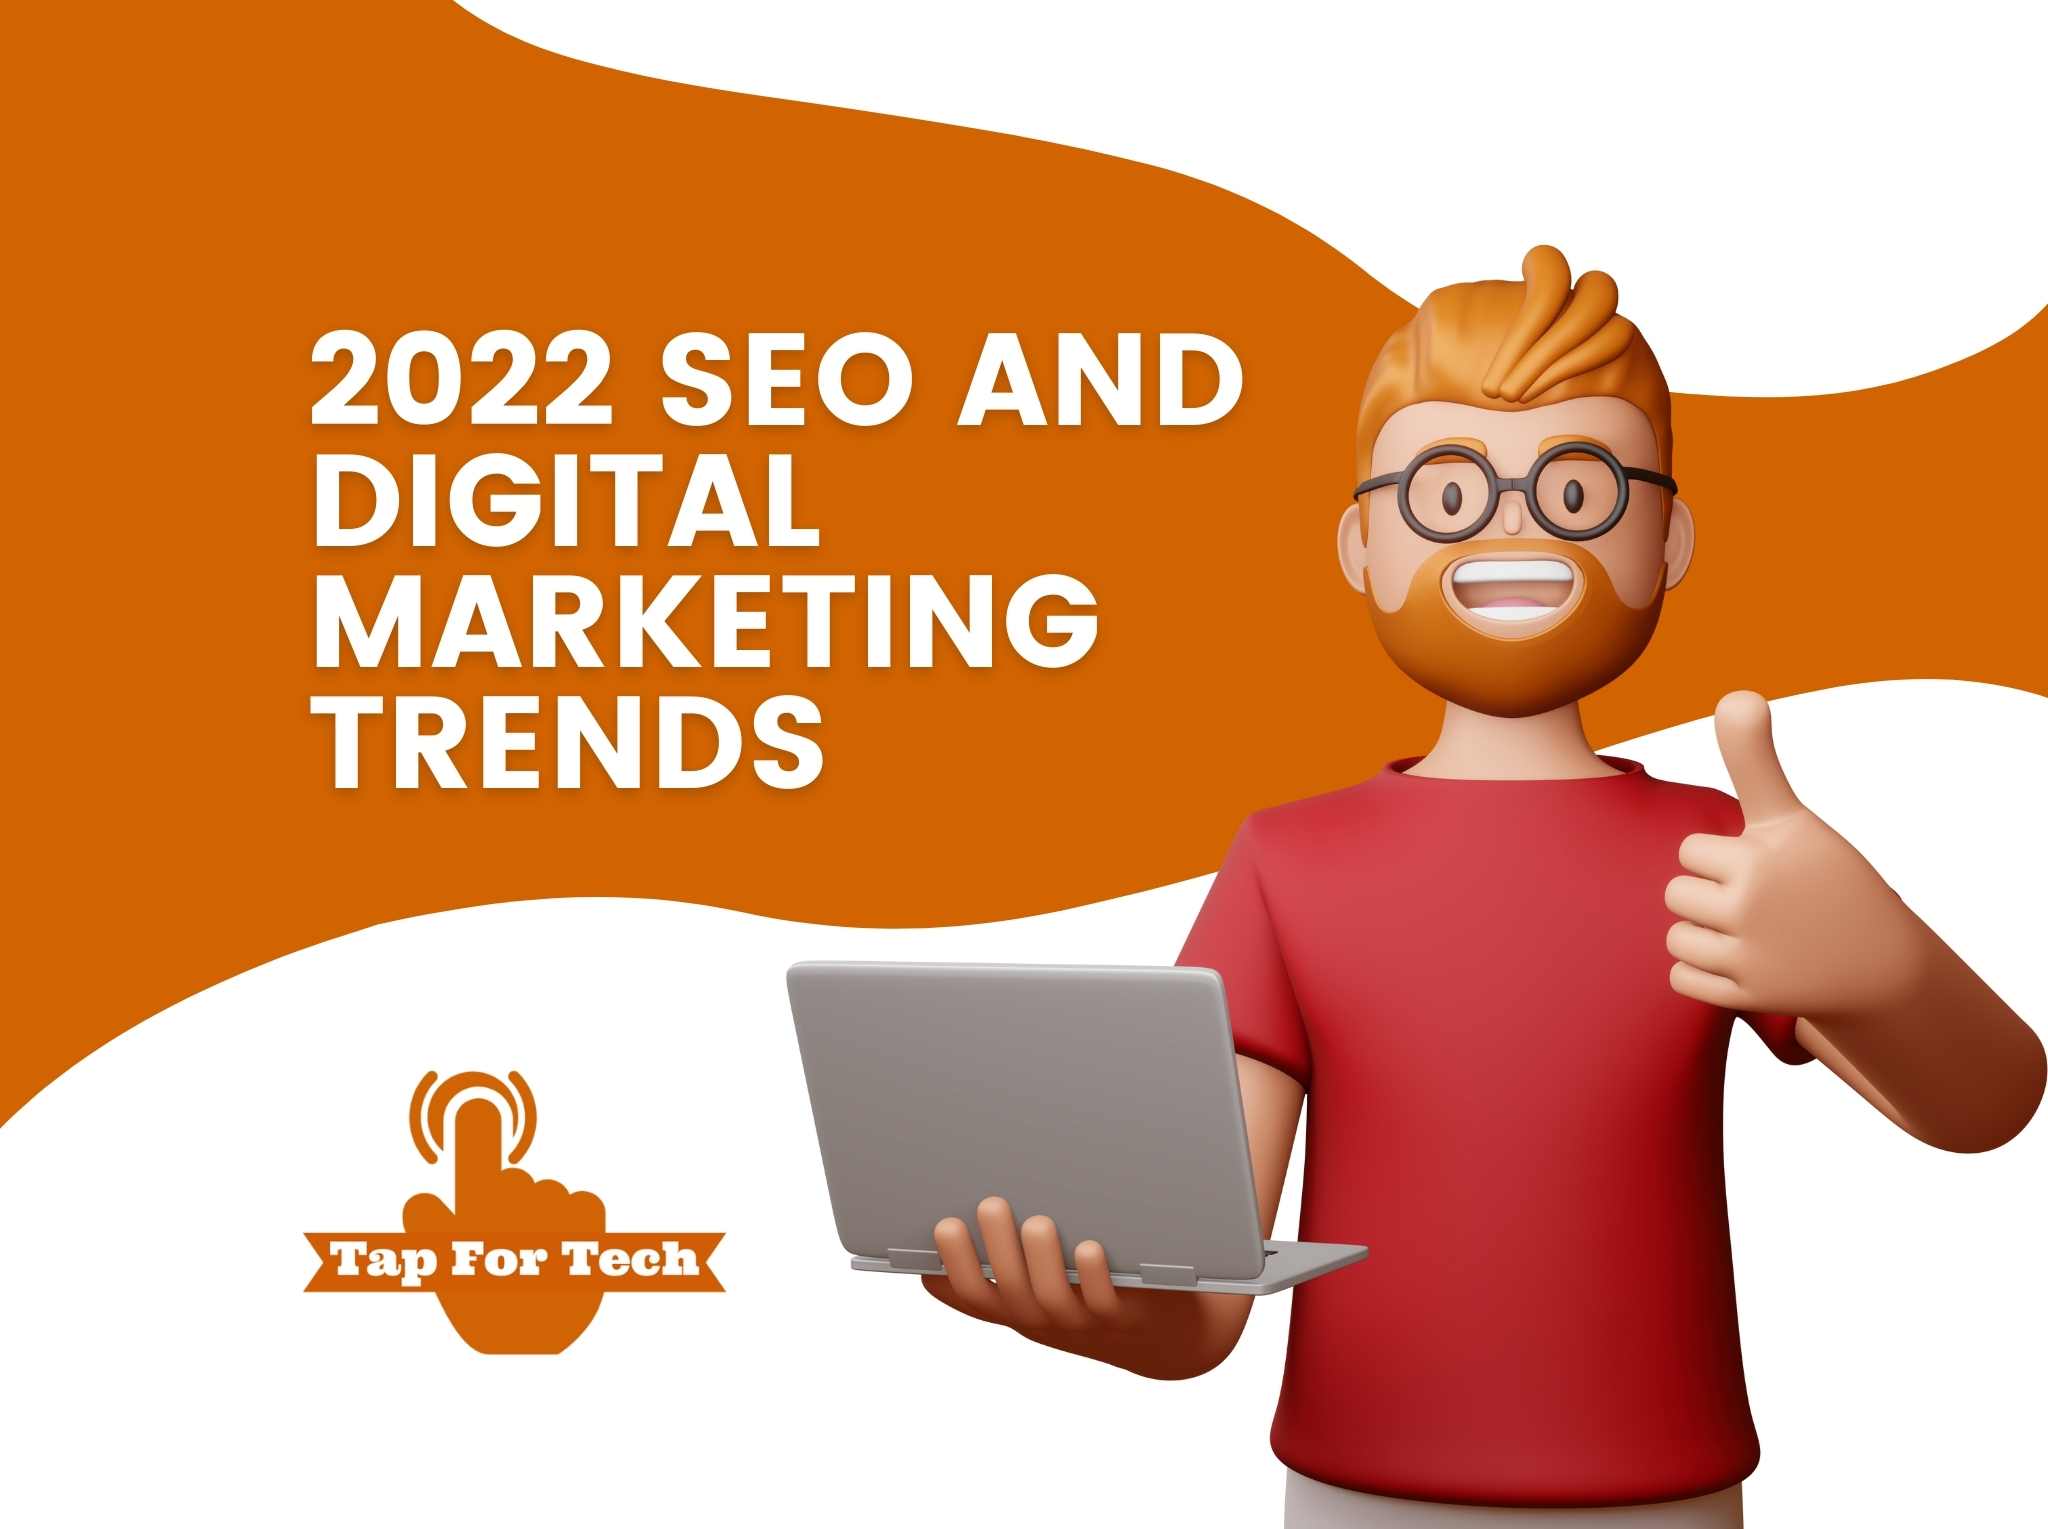 2022 SEO AND DIGITAL MARKETING TRENDS